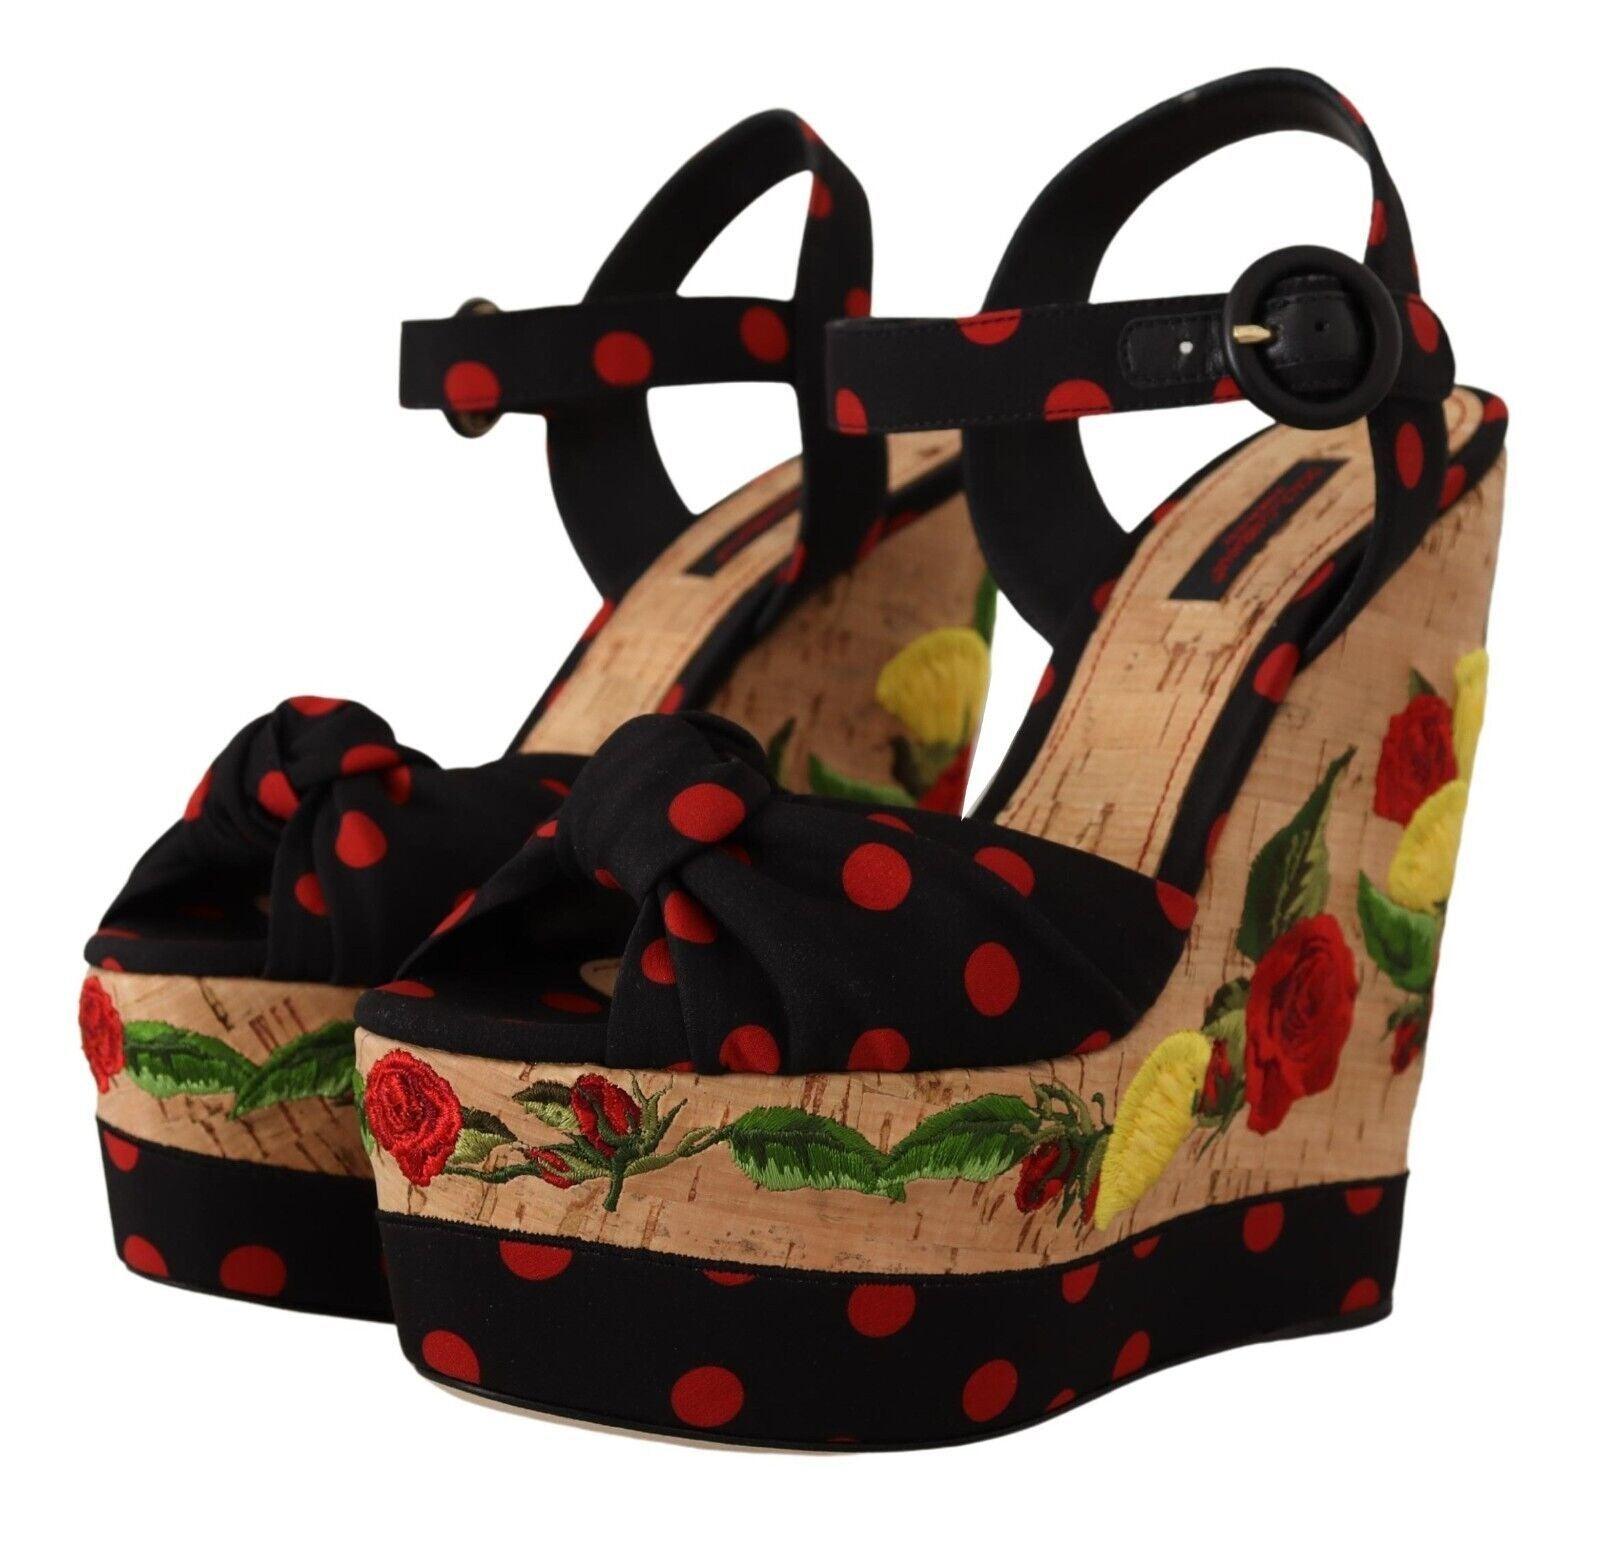 D&G Multicolour Platform Wedges Sandals Charmeuse Shoes - Designed by Dolce & Gabbana Available to Buy at a Discounted Price on Moon Behind The Hill Online Designer Discount Store